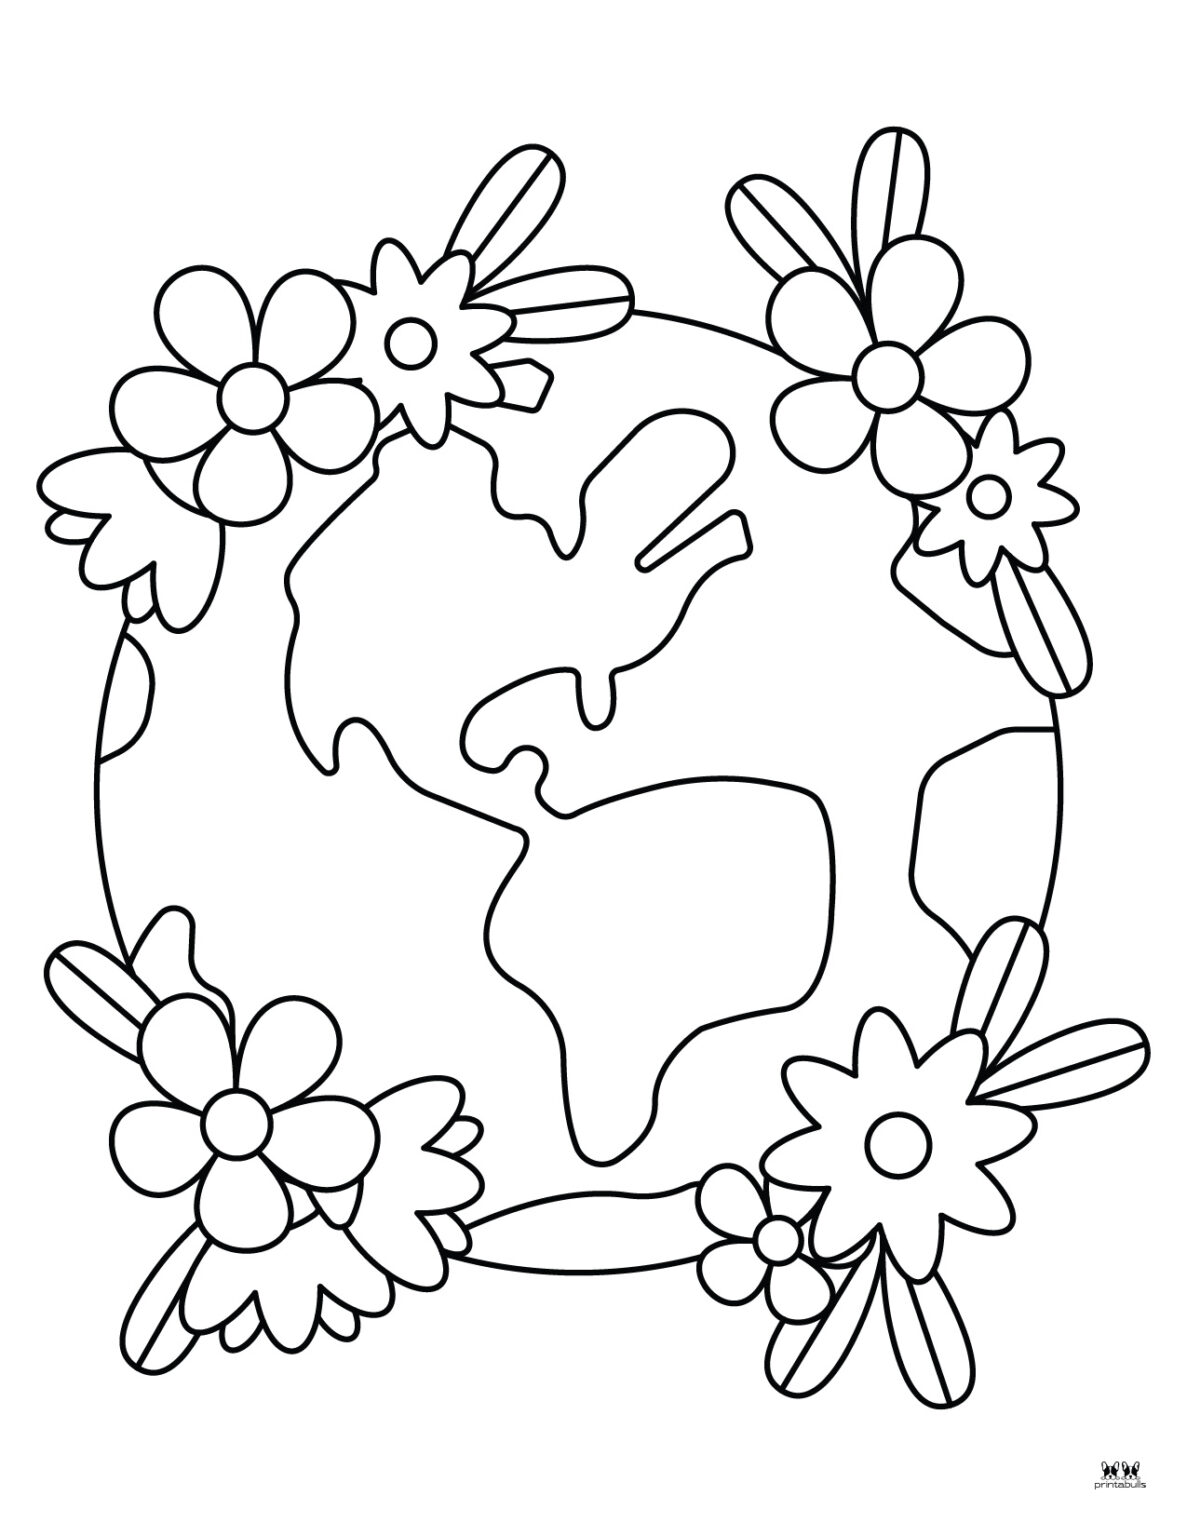 Earth Coloring Pages - 25 FREE Pages | Printabulls